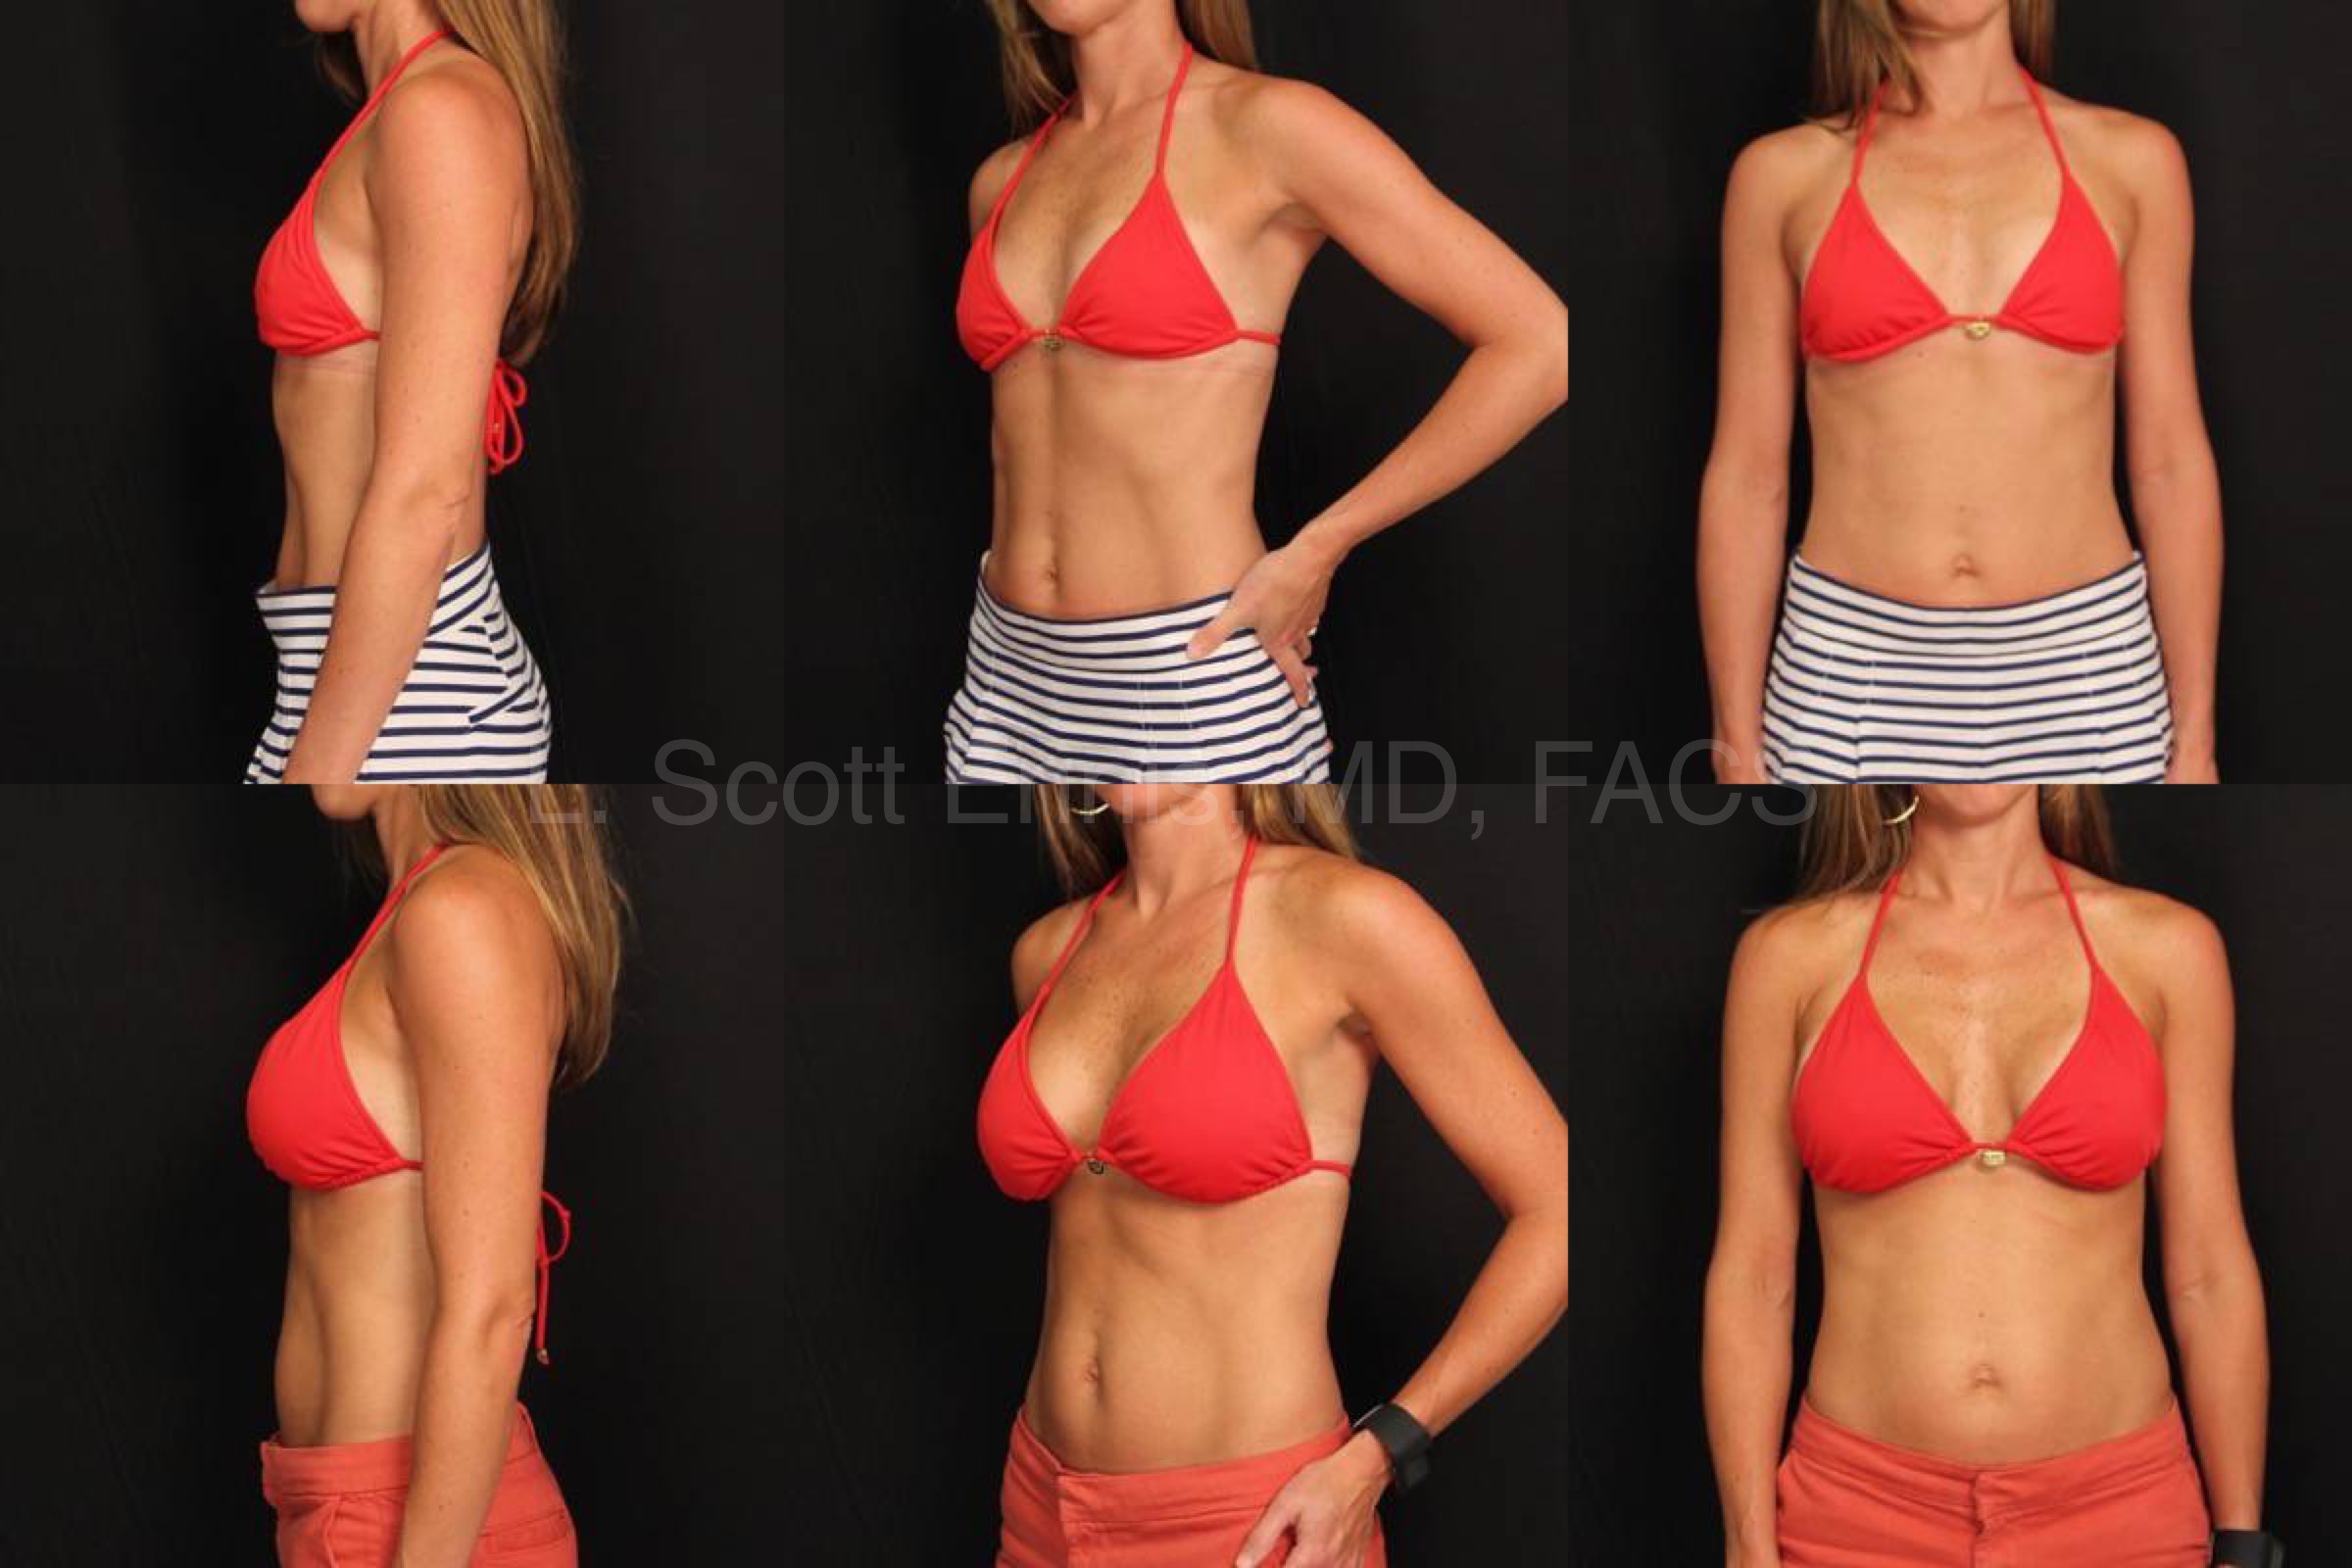 Breast Augmentation: How Long Does it Take?